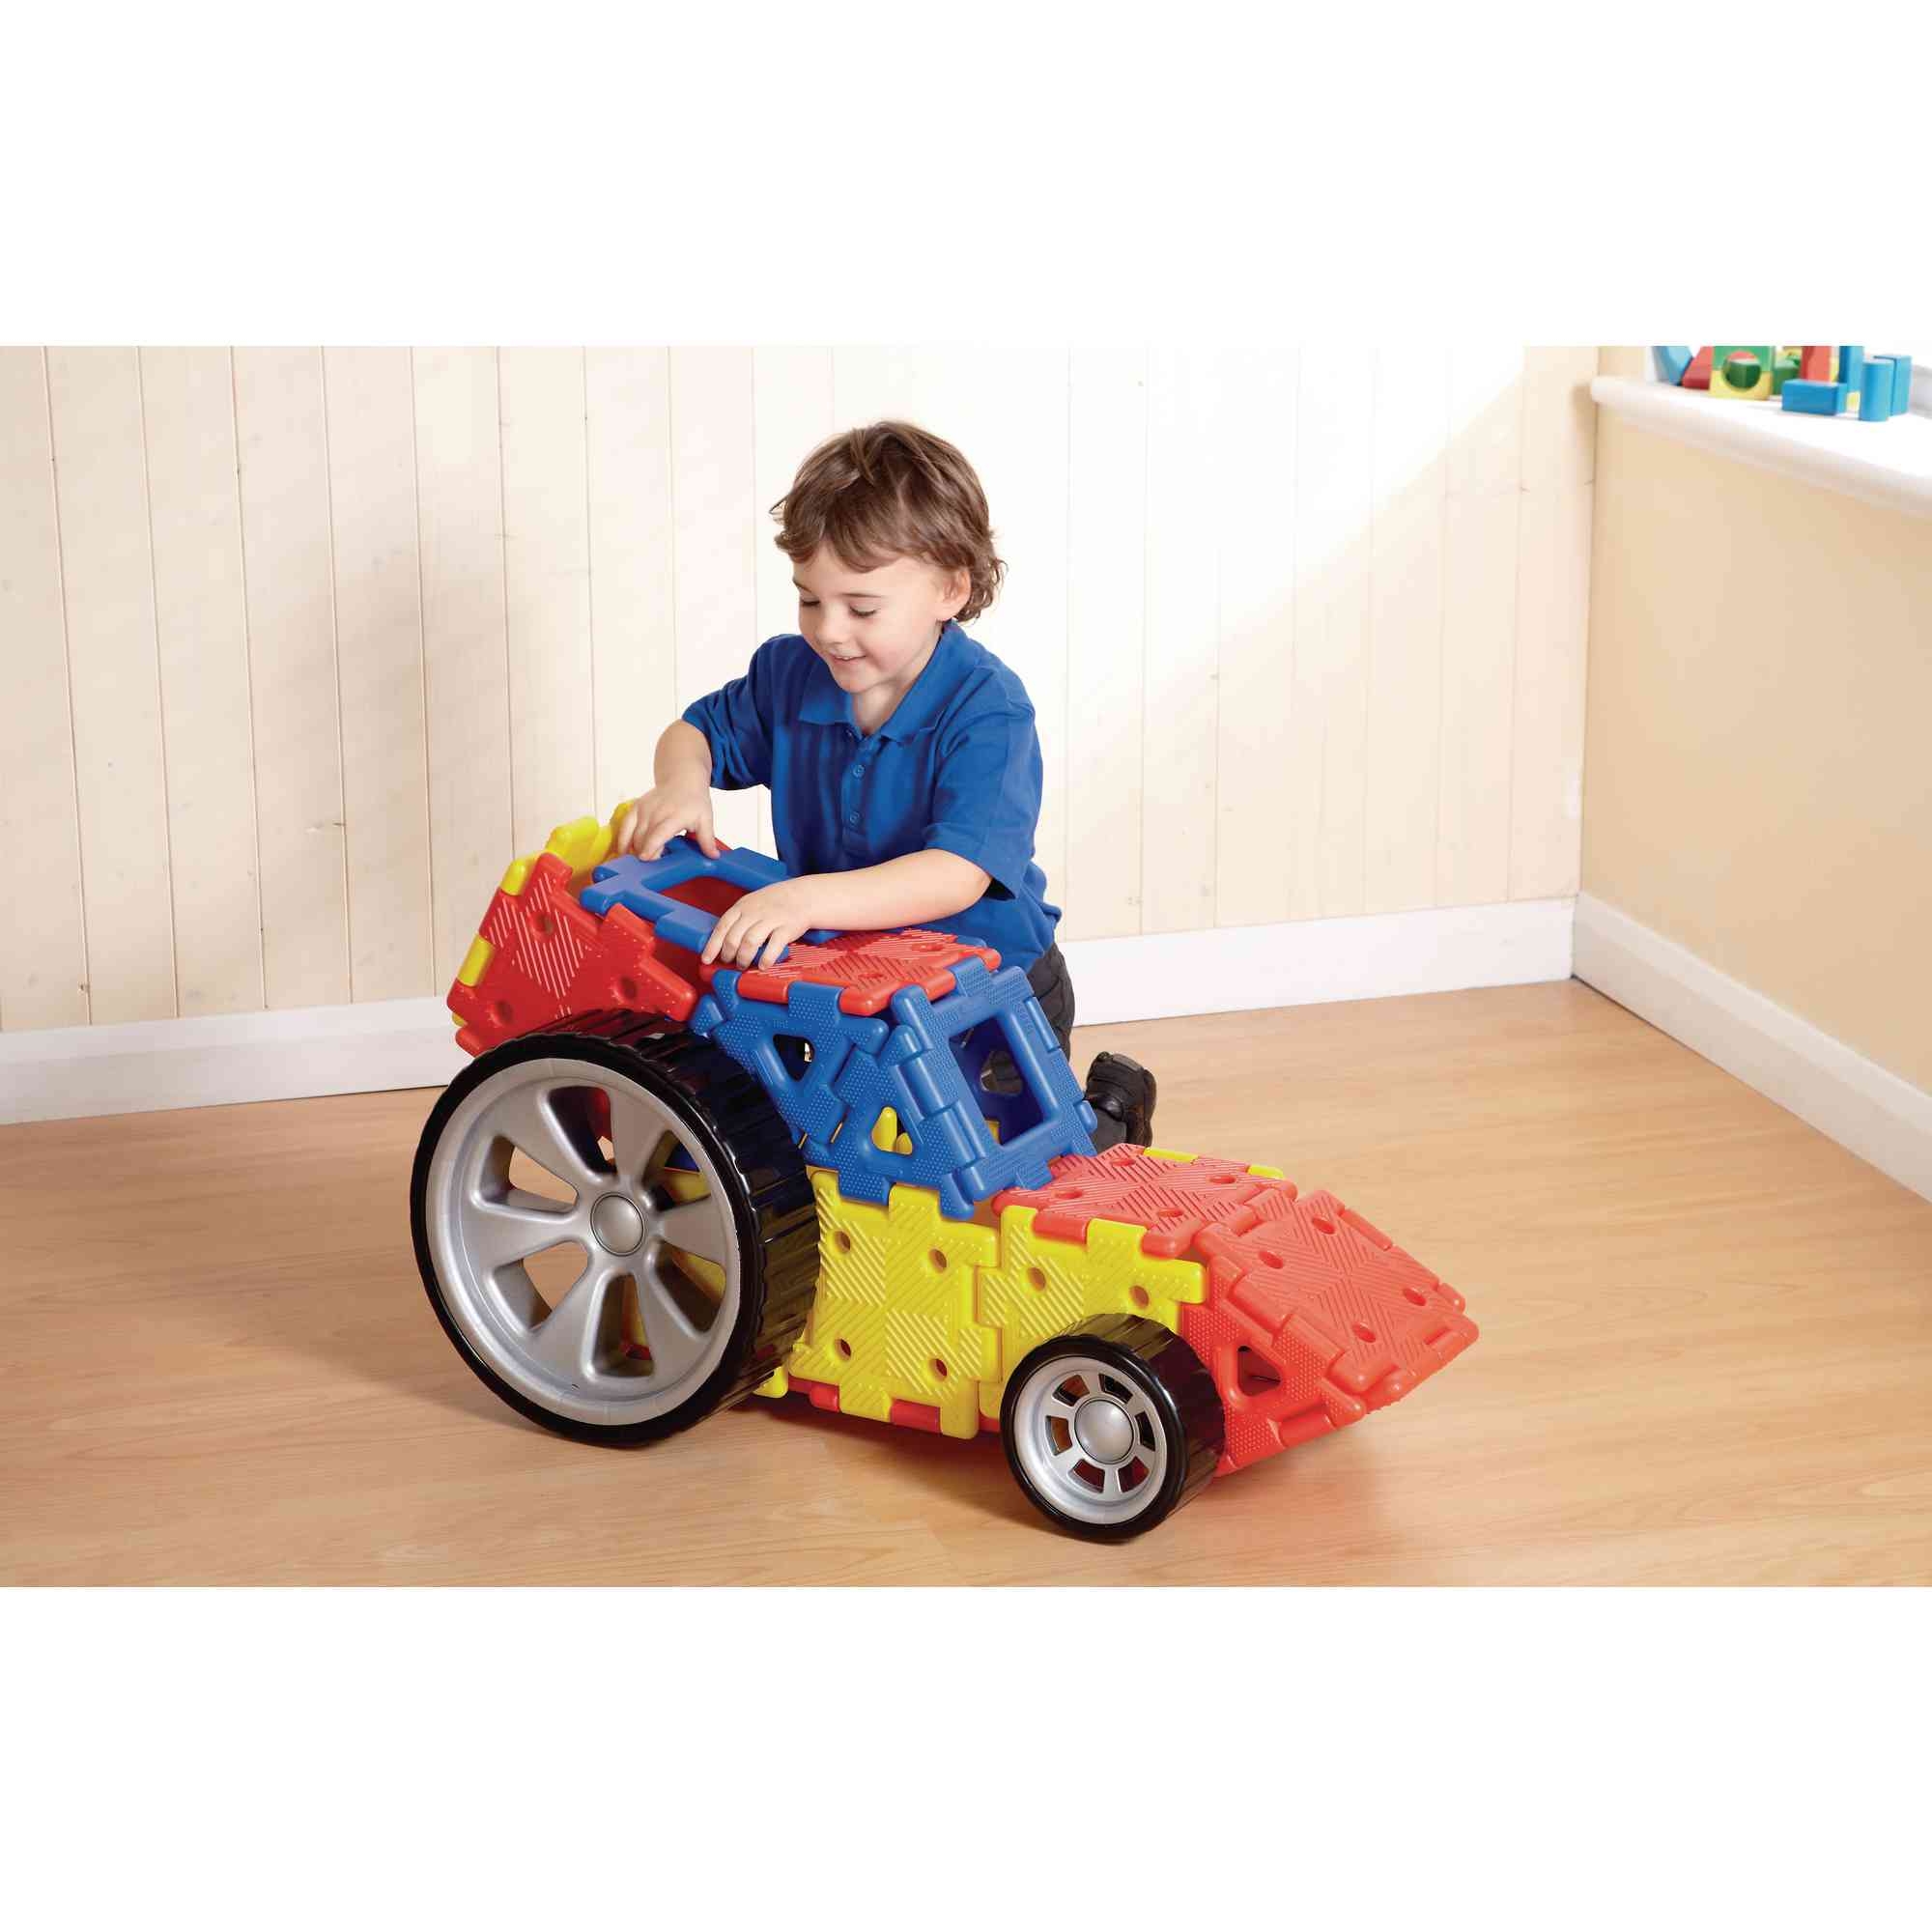 Giant Polydron Vehicle Set - Pack of 32